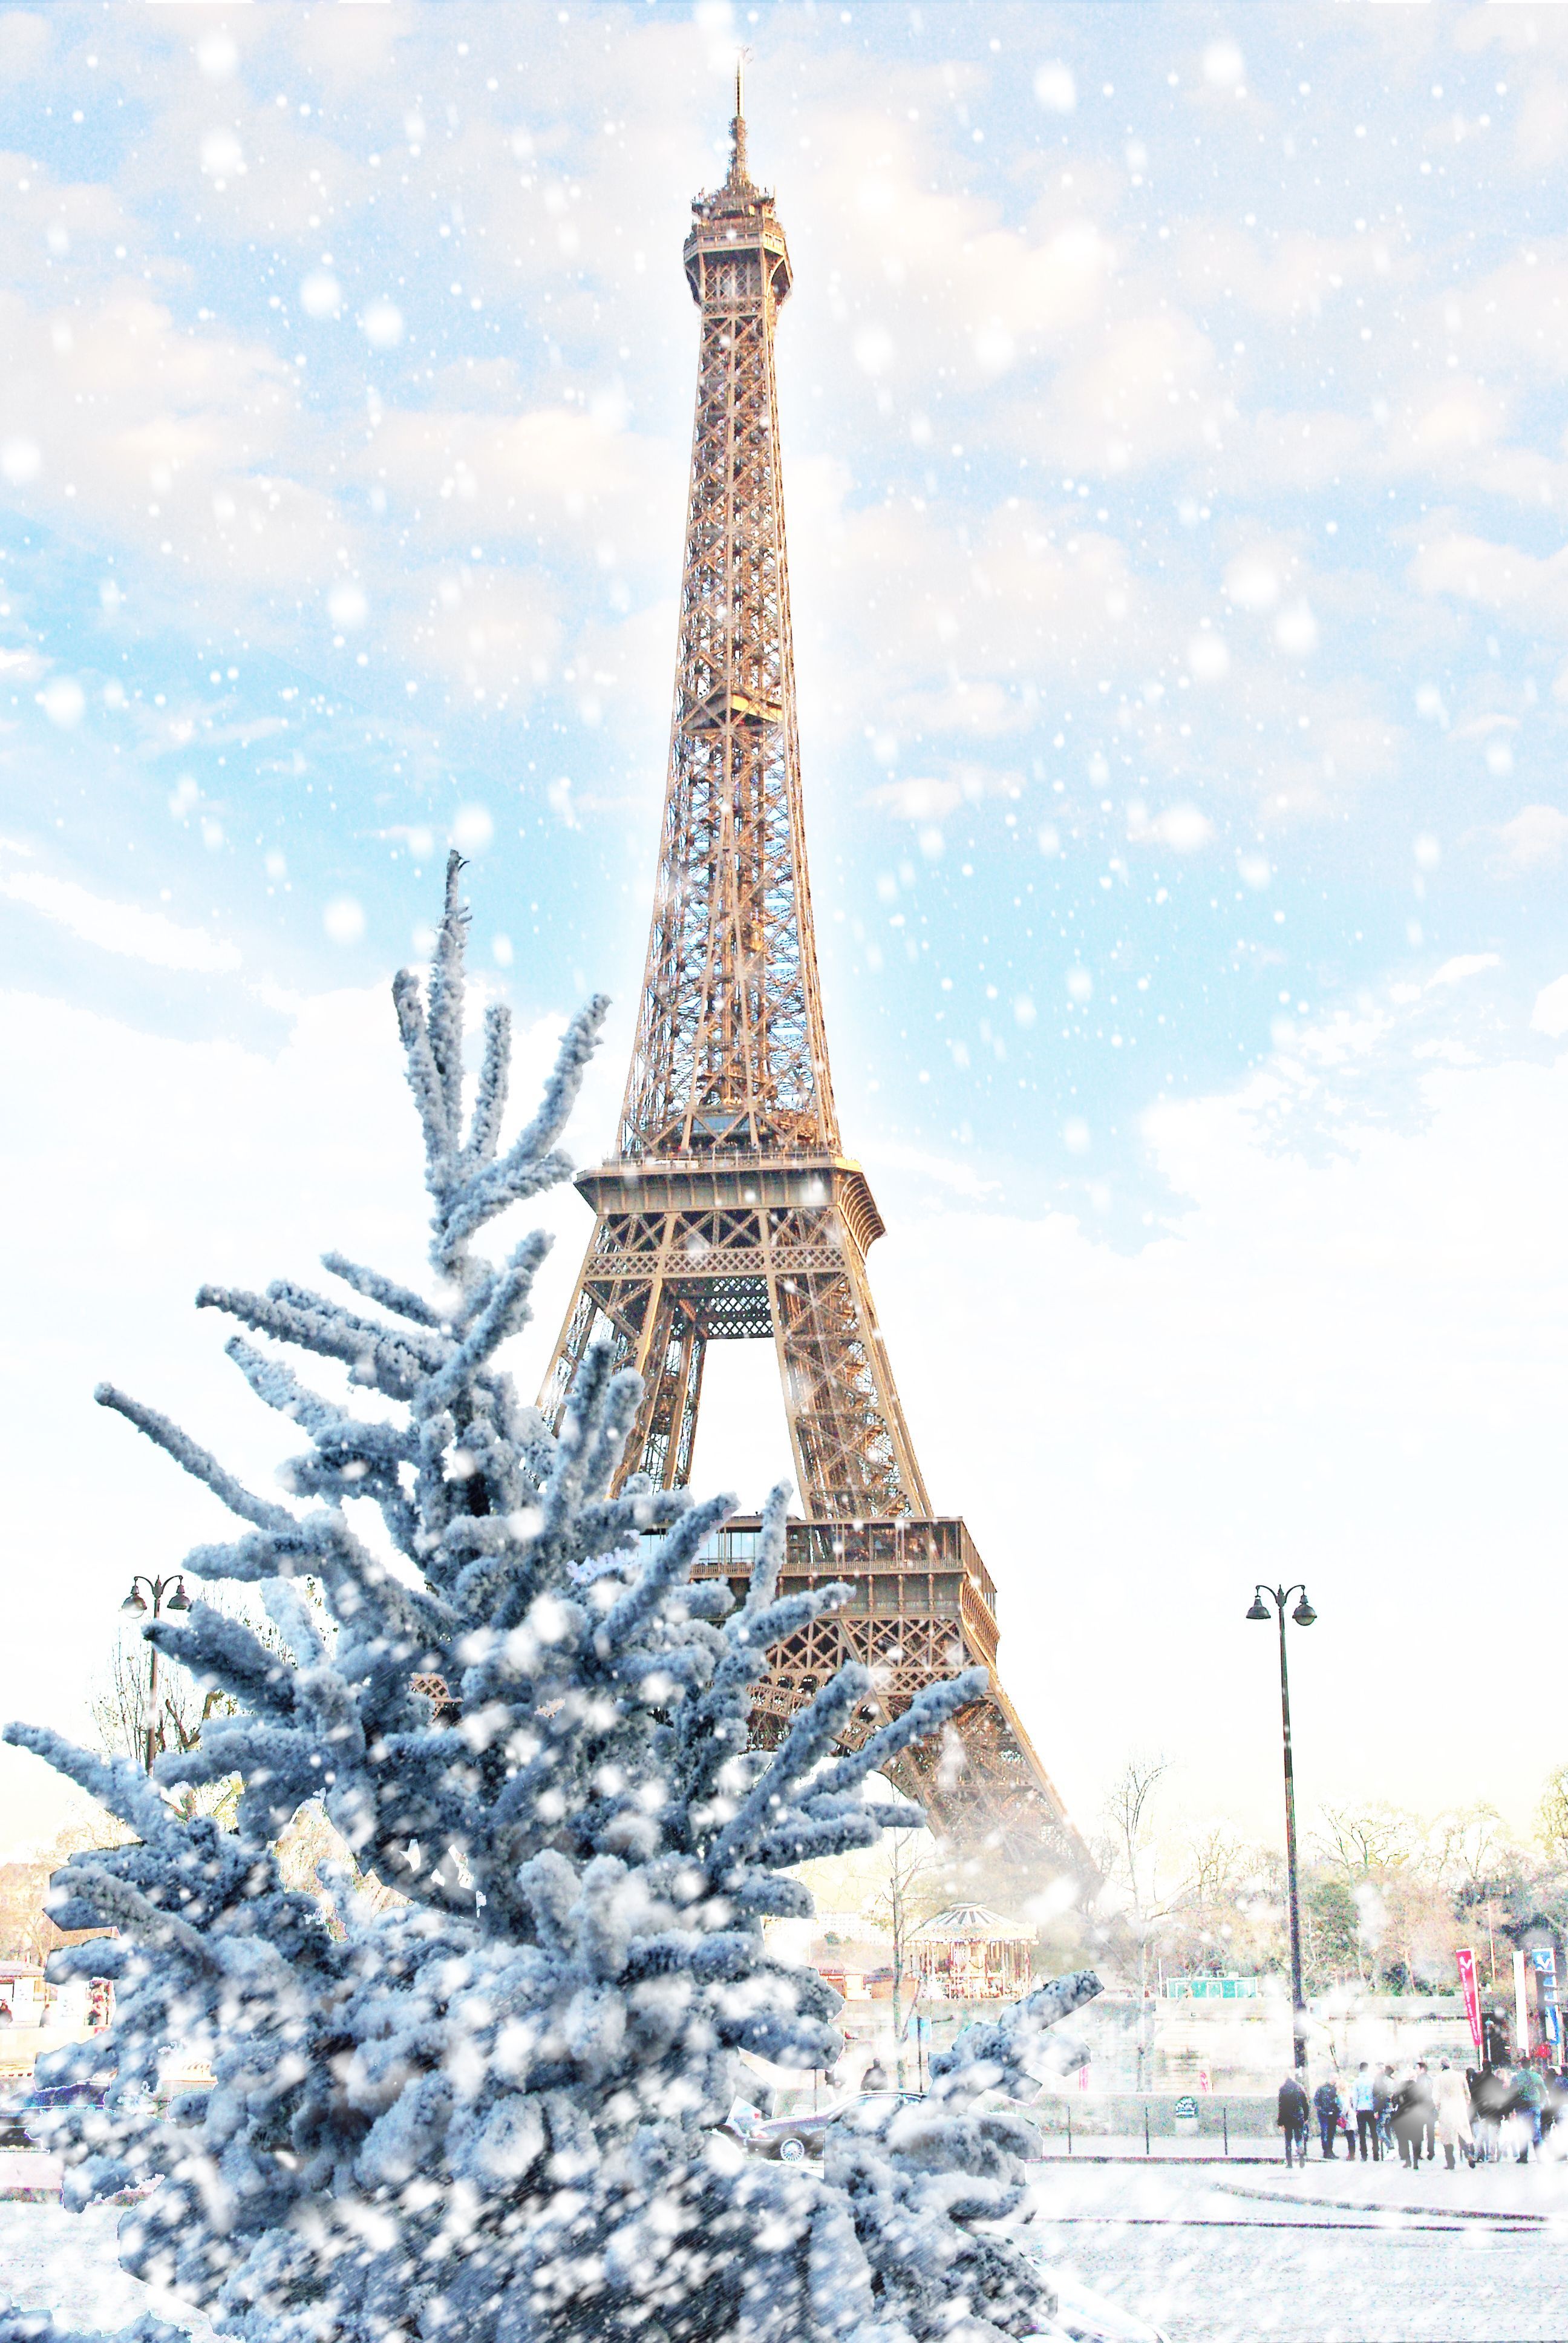 All there is to know about Winter in France. Paris wallpaper, Eiffel tower photography, Paris picture